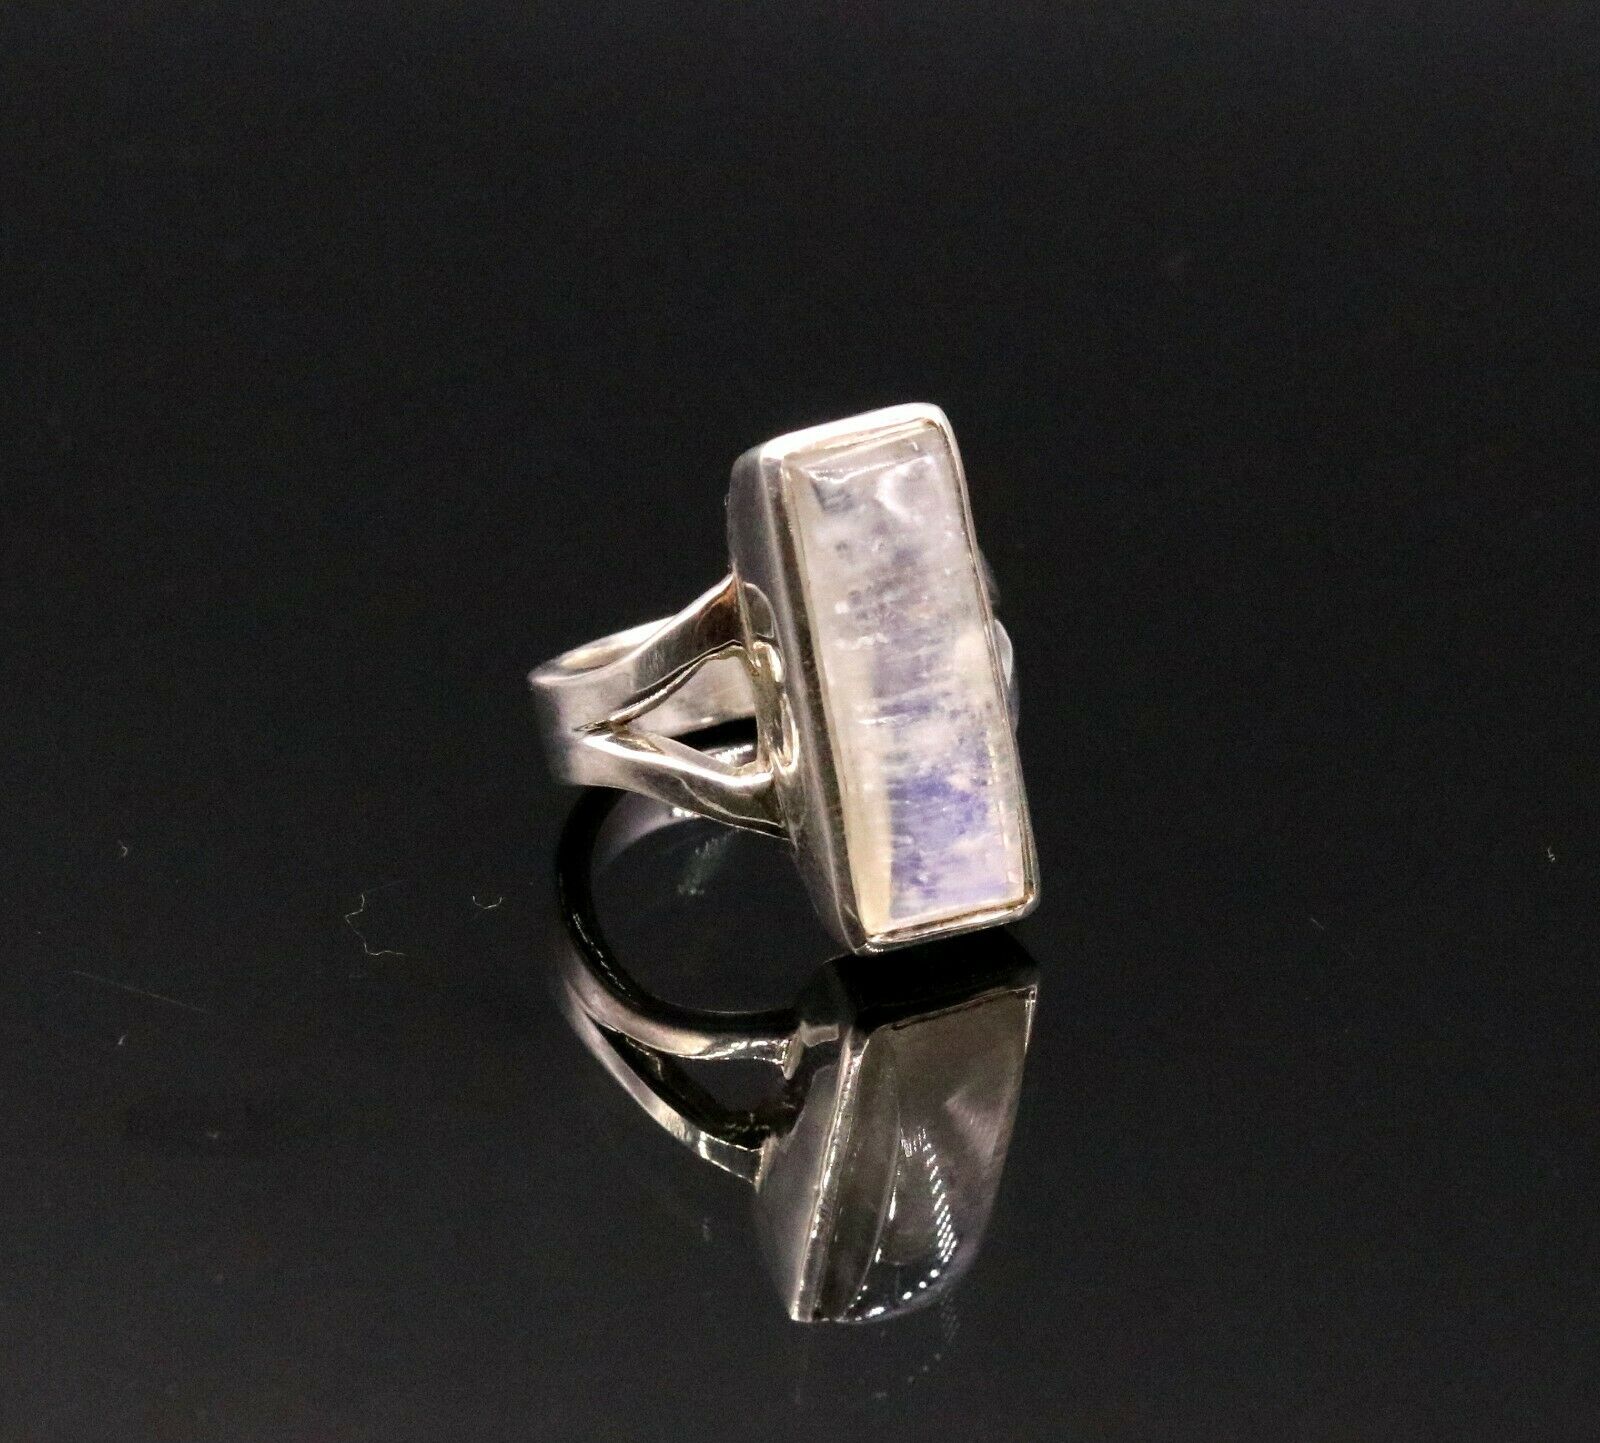 GORGEOUS RAINBOWS MOONSTONE 925 SOLID SILVER RING BAND UNISEX GIFTING sr146 - TRIBAL ORNAMENTS